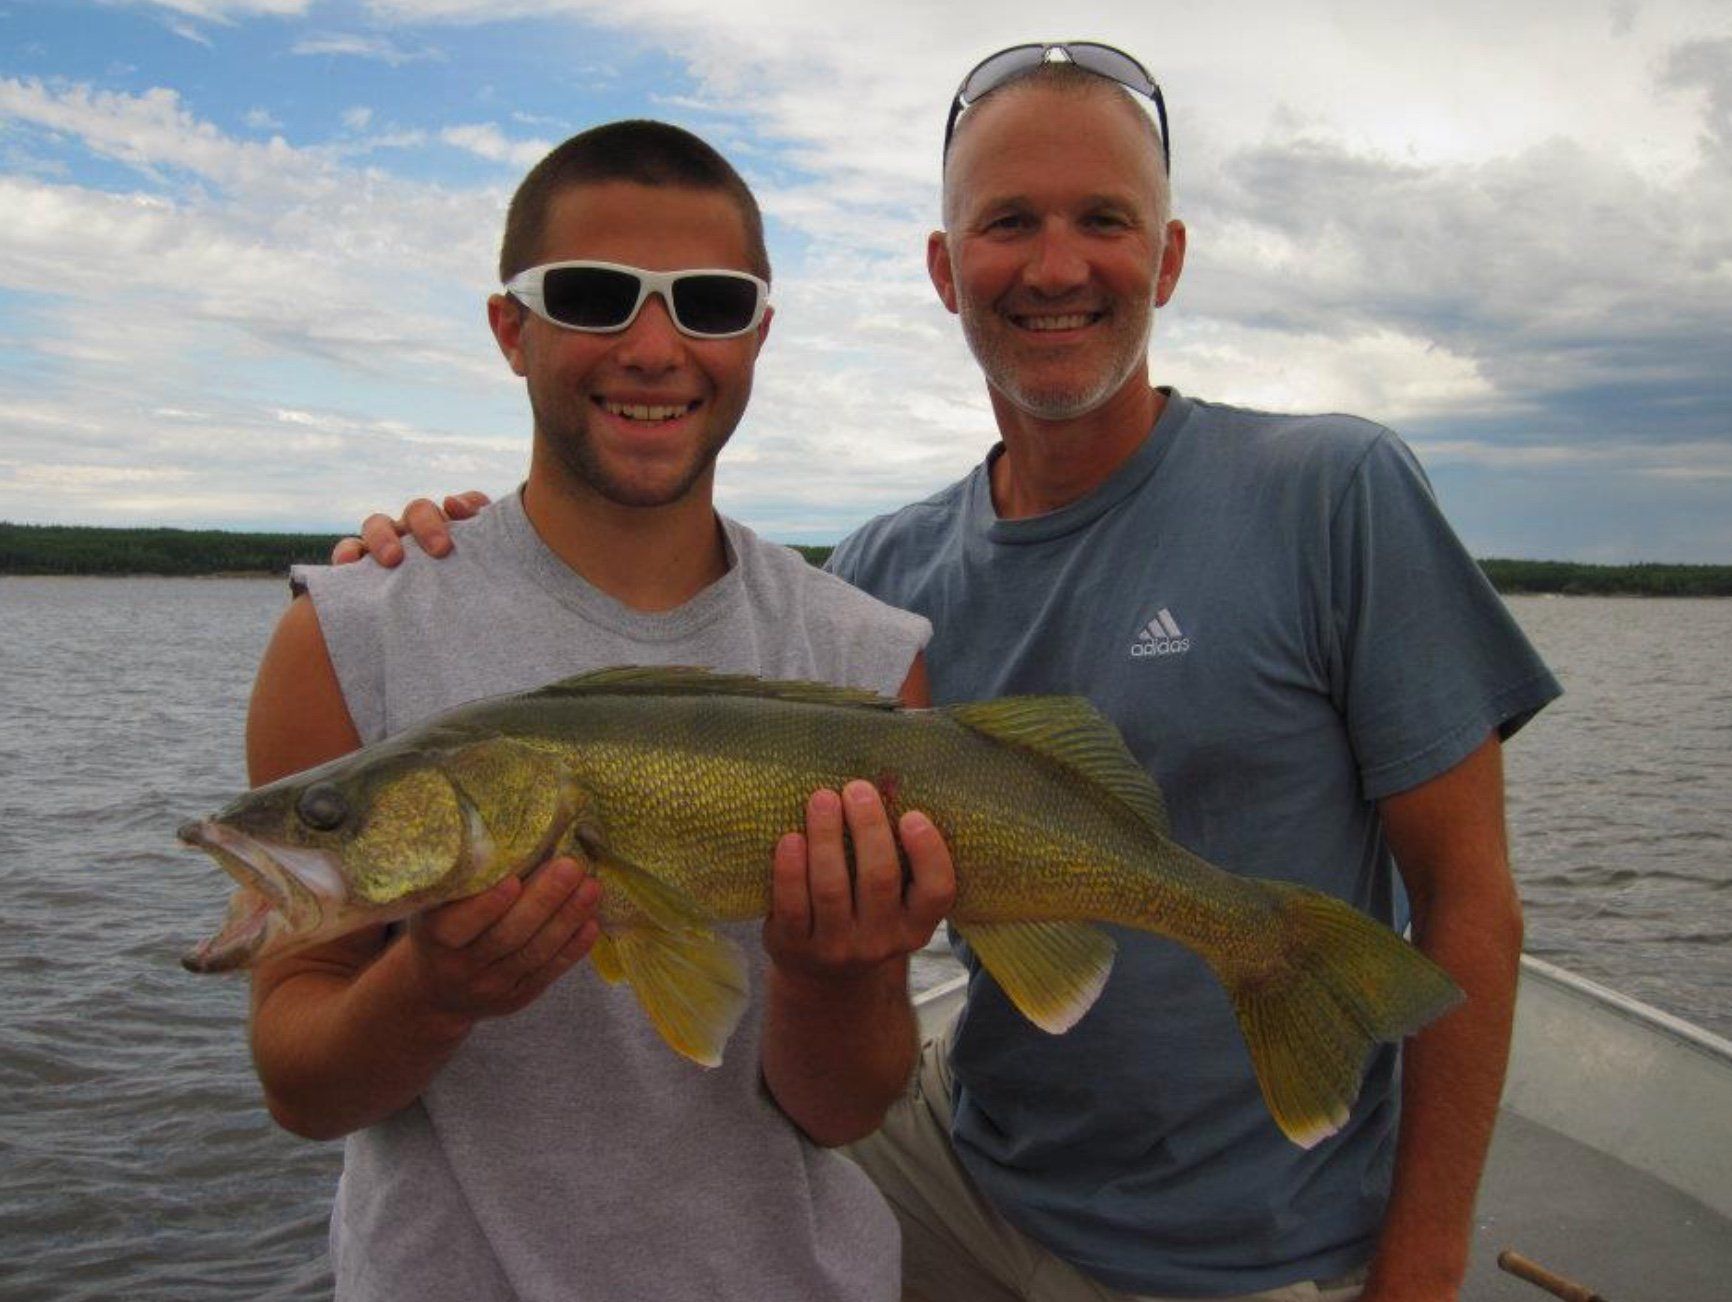 Father and son with a walleye while fishing in Canada.